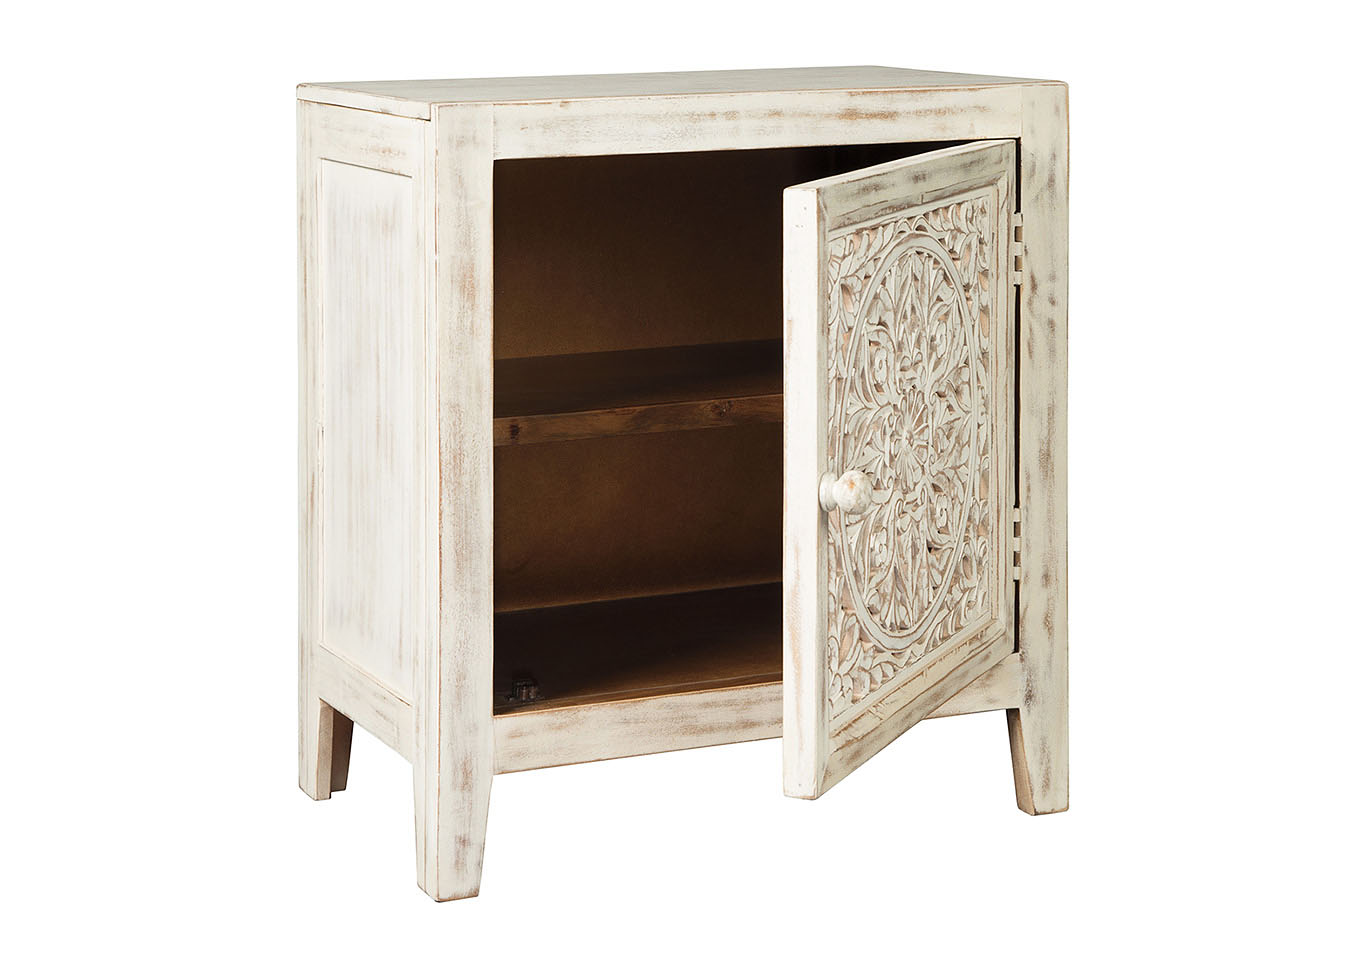 Fossil Ridge Accent Cabinet,Direct To Consumer Express